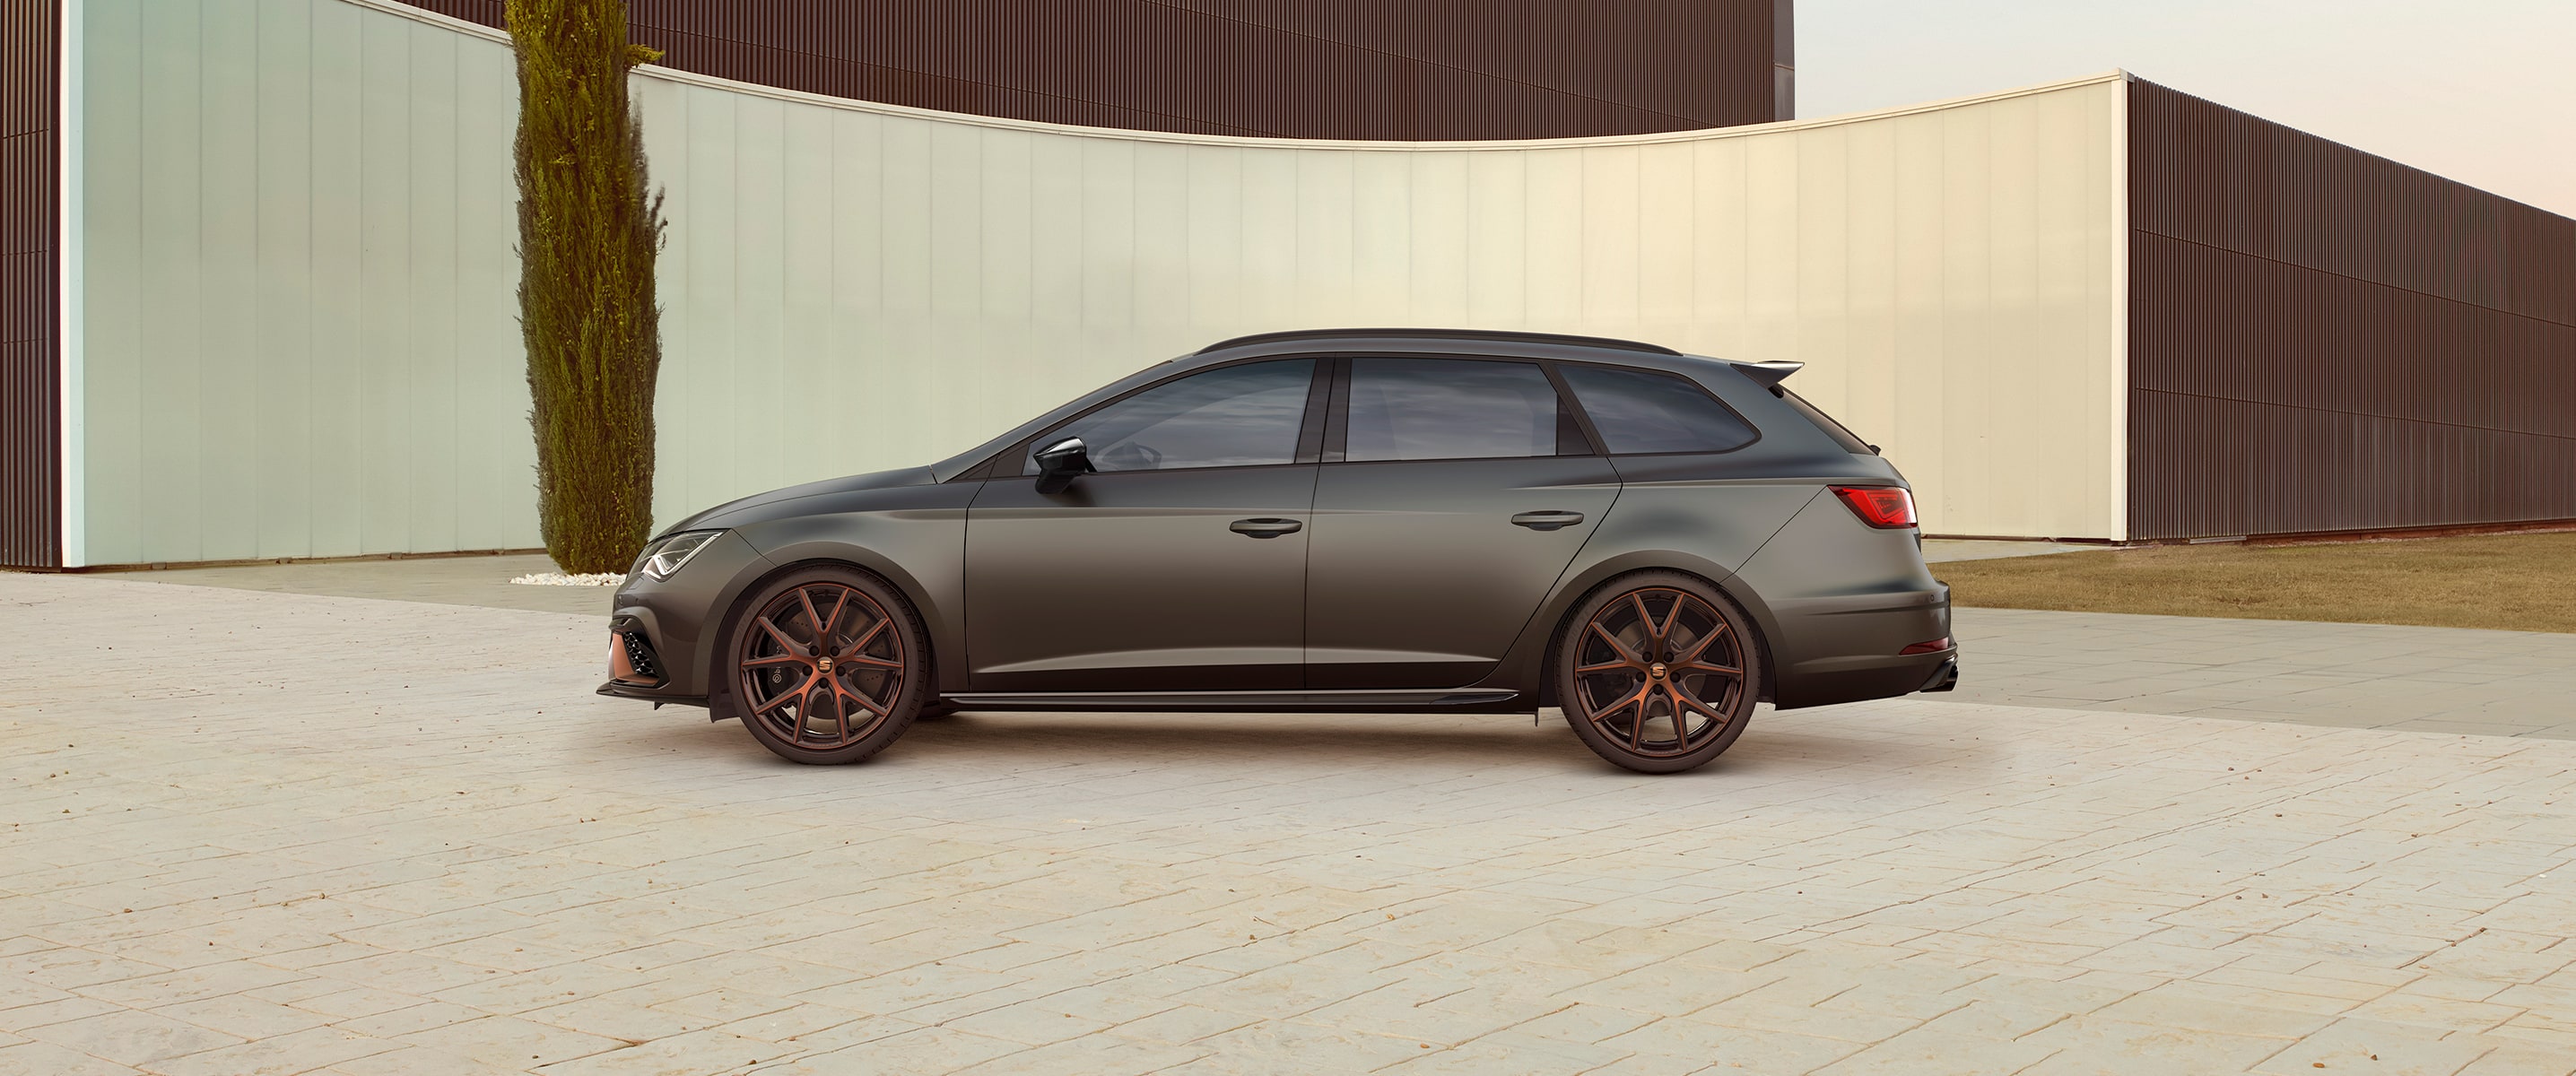 Side view of the CUPRA R ST 